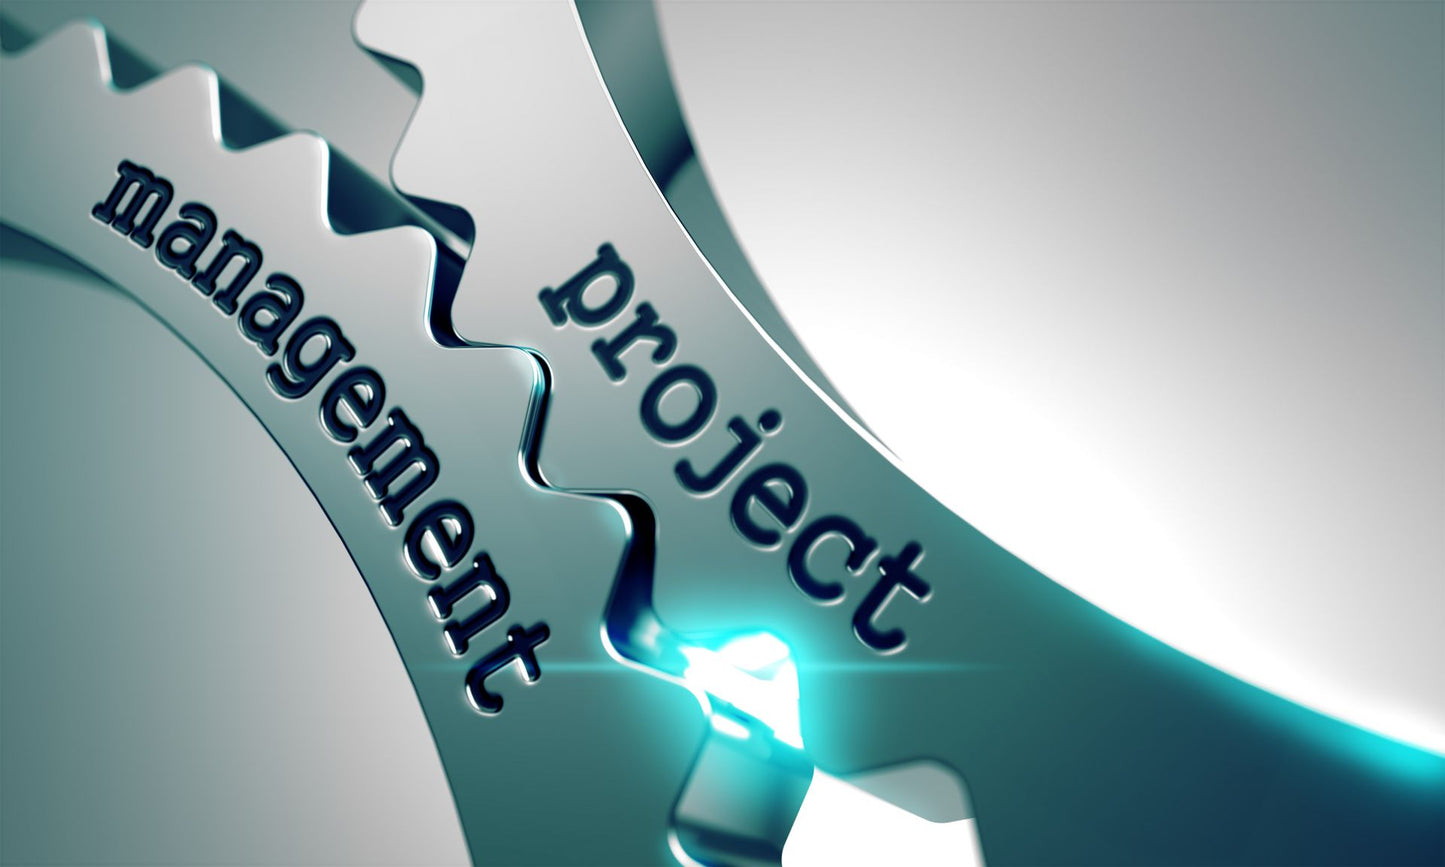 The critical milestones to successful project management